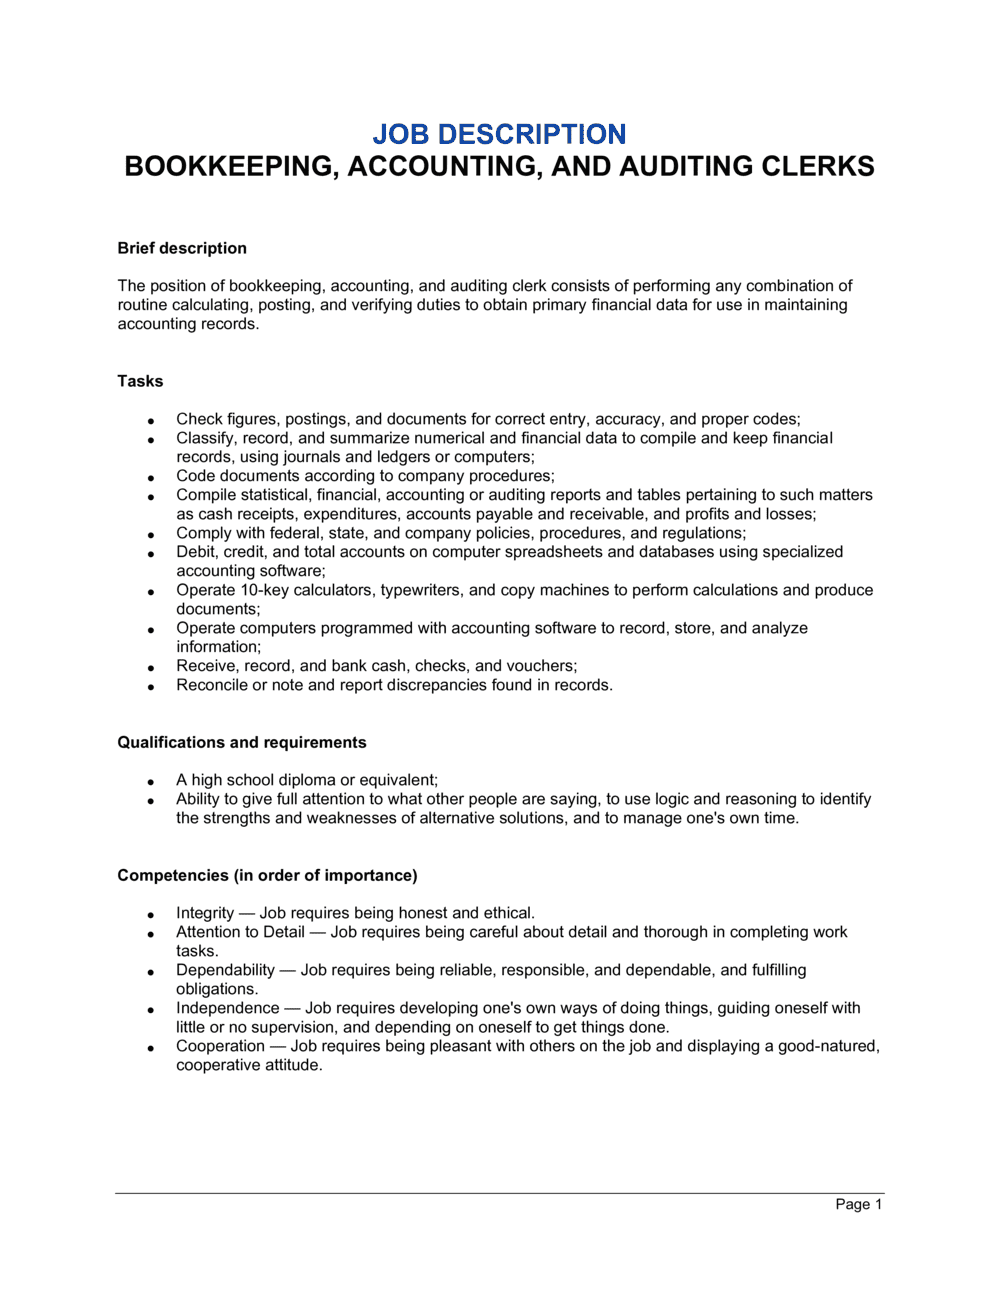 Bookkeeping, Accounting And Auditing Clerk Job Description  For Accounting Job Description Template